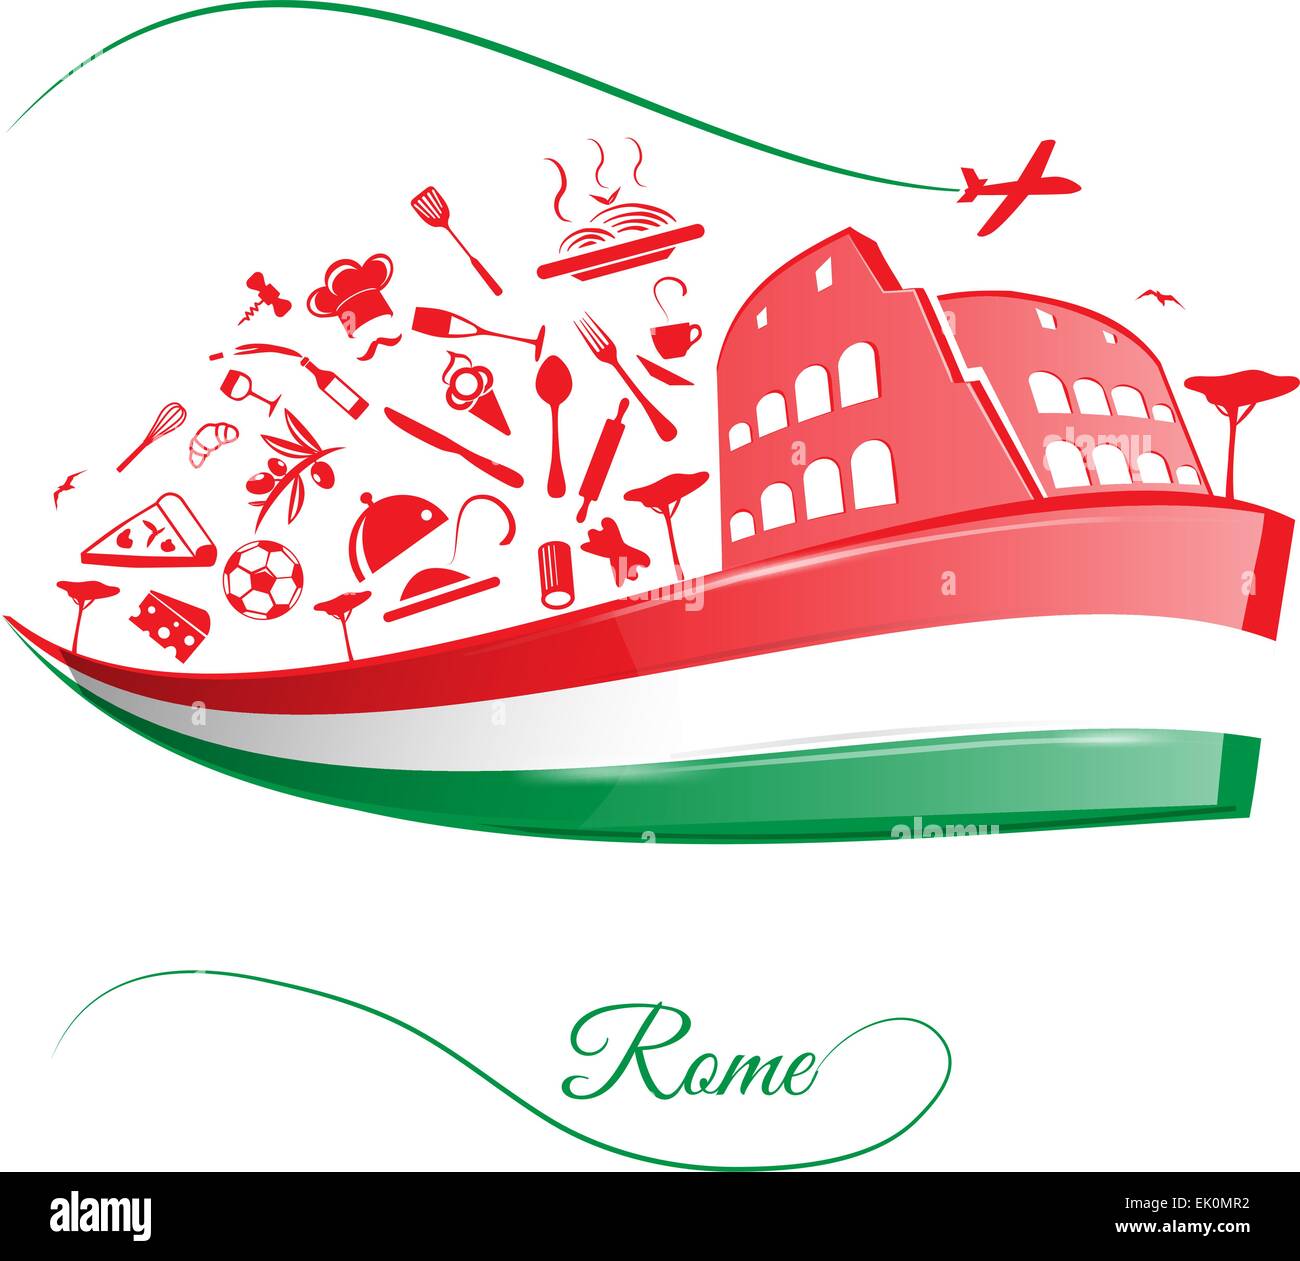 rome colosseum with food element on italian flag Stock Vector